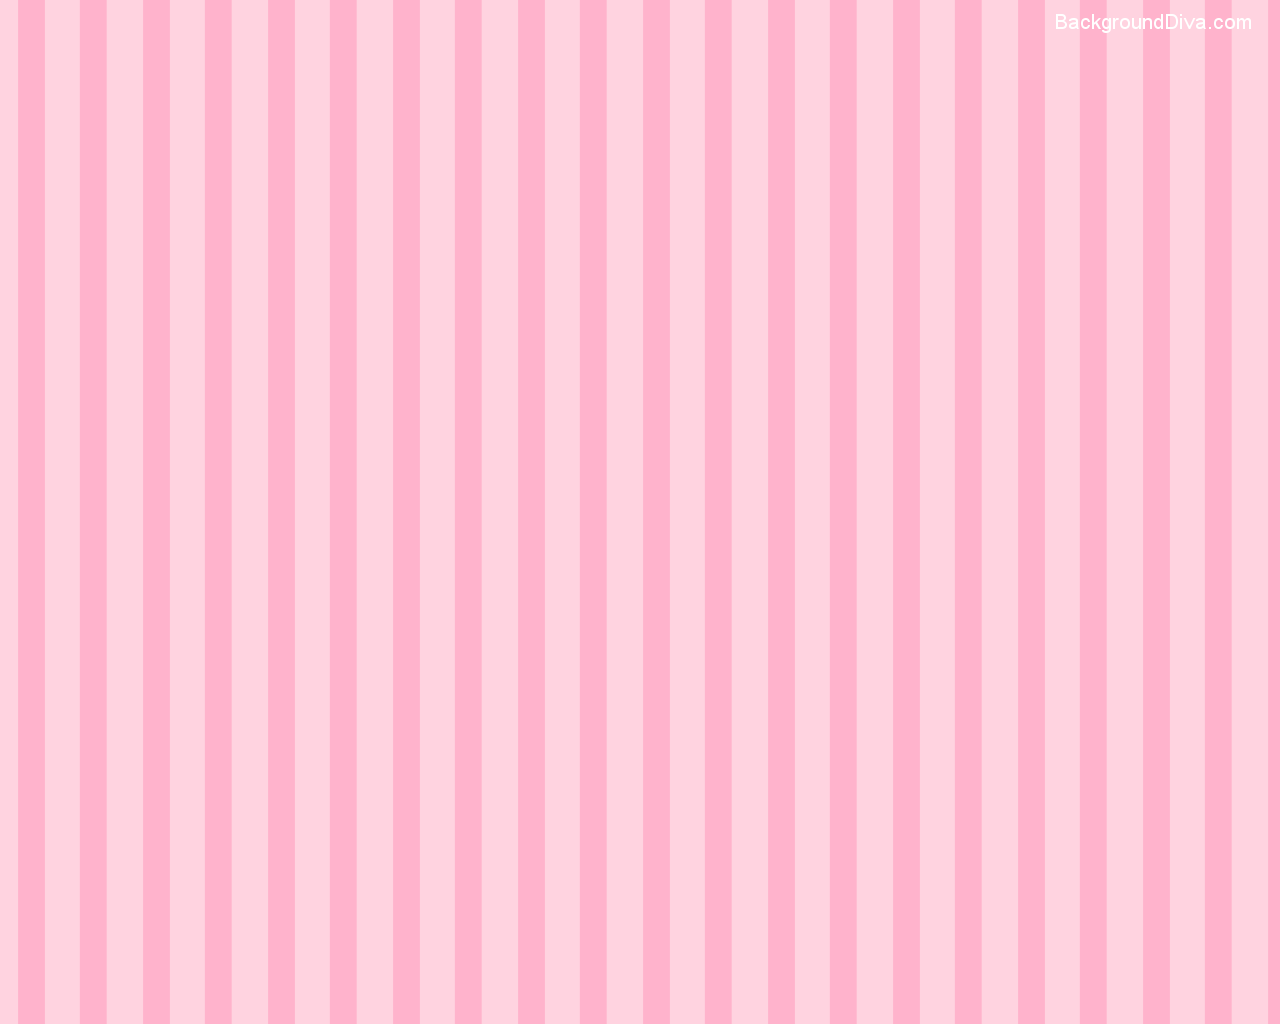 Light Pink Striped Wallpaper Images Pictures   Becuo